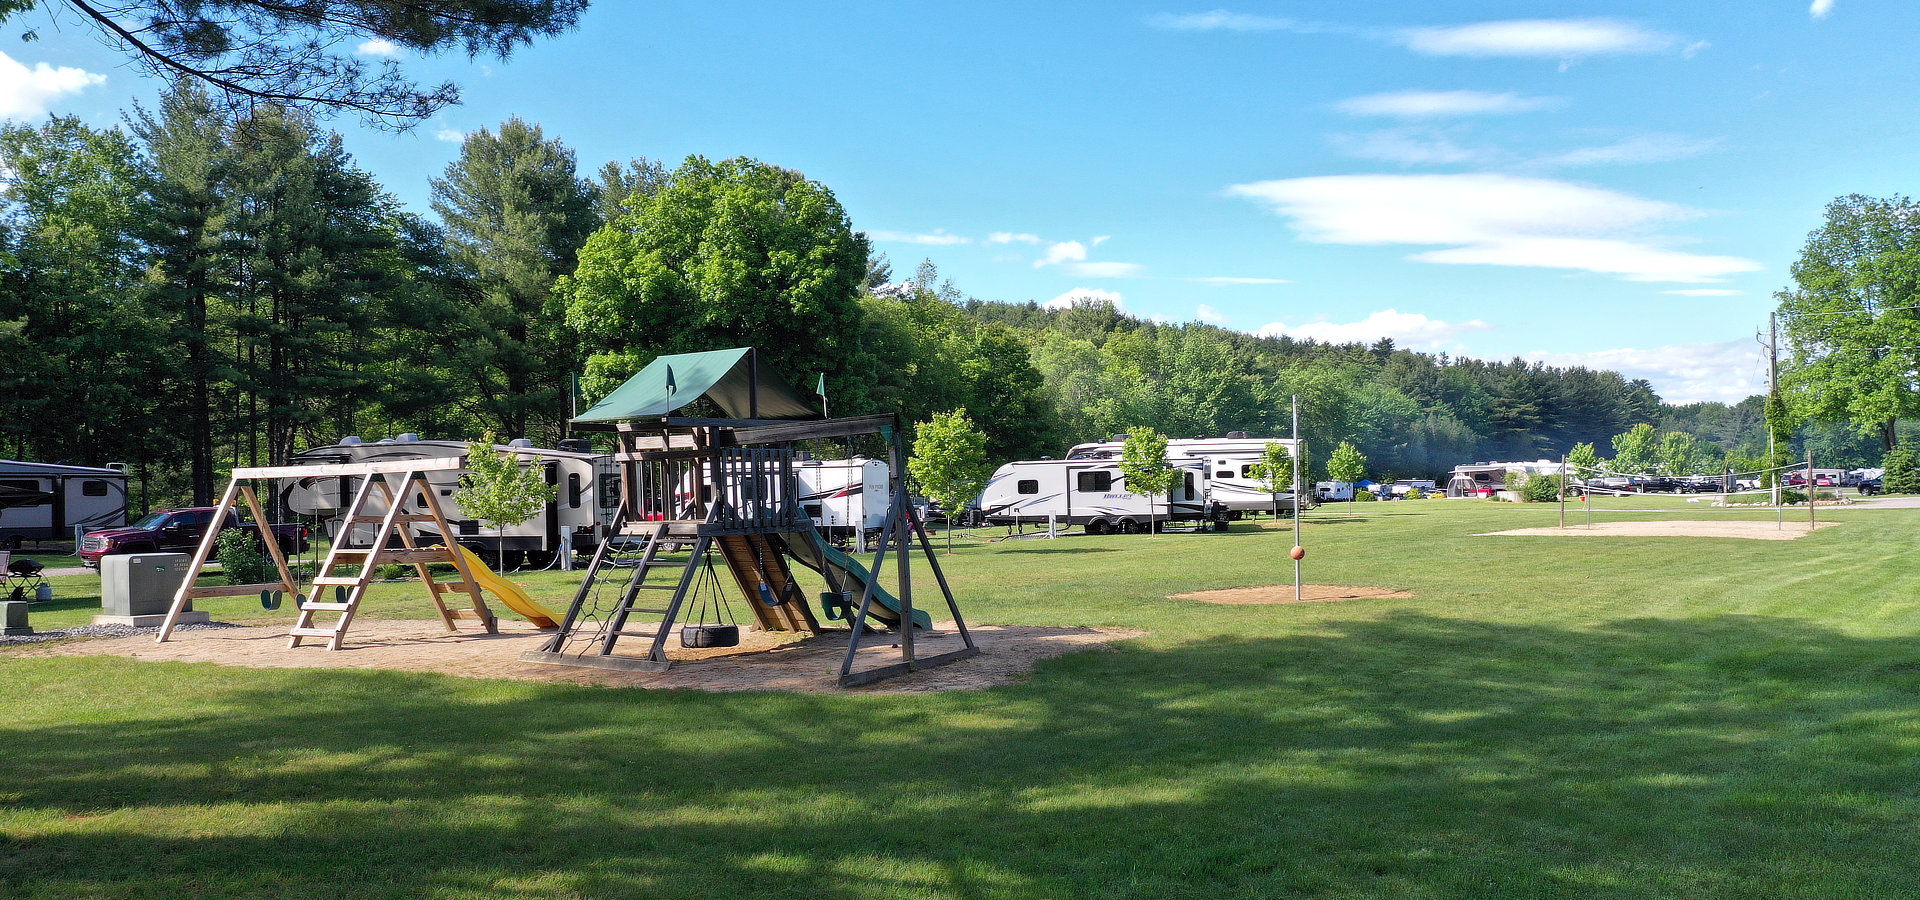 Playground with RV sites in the background